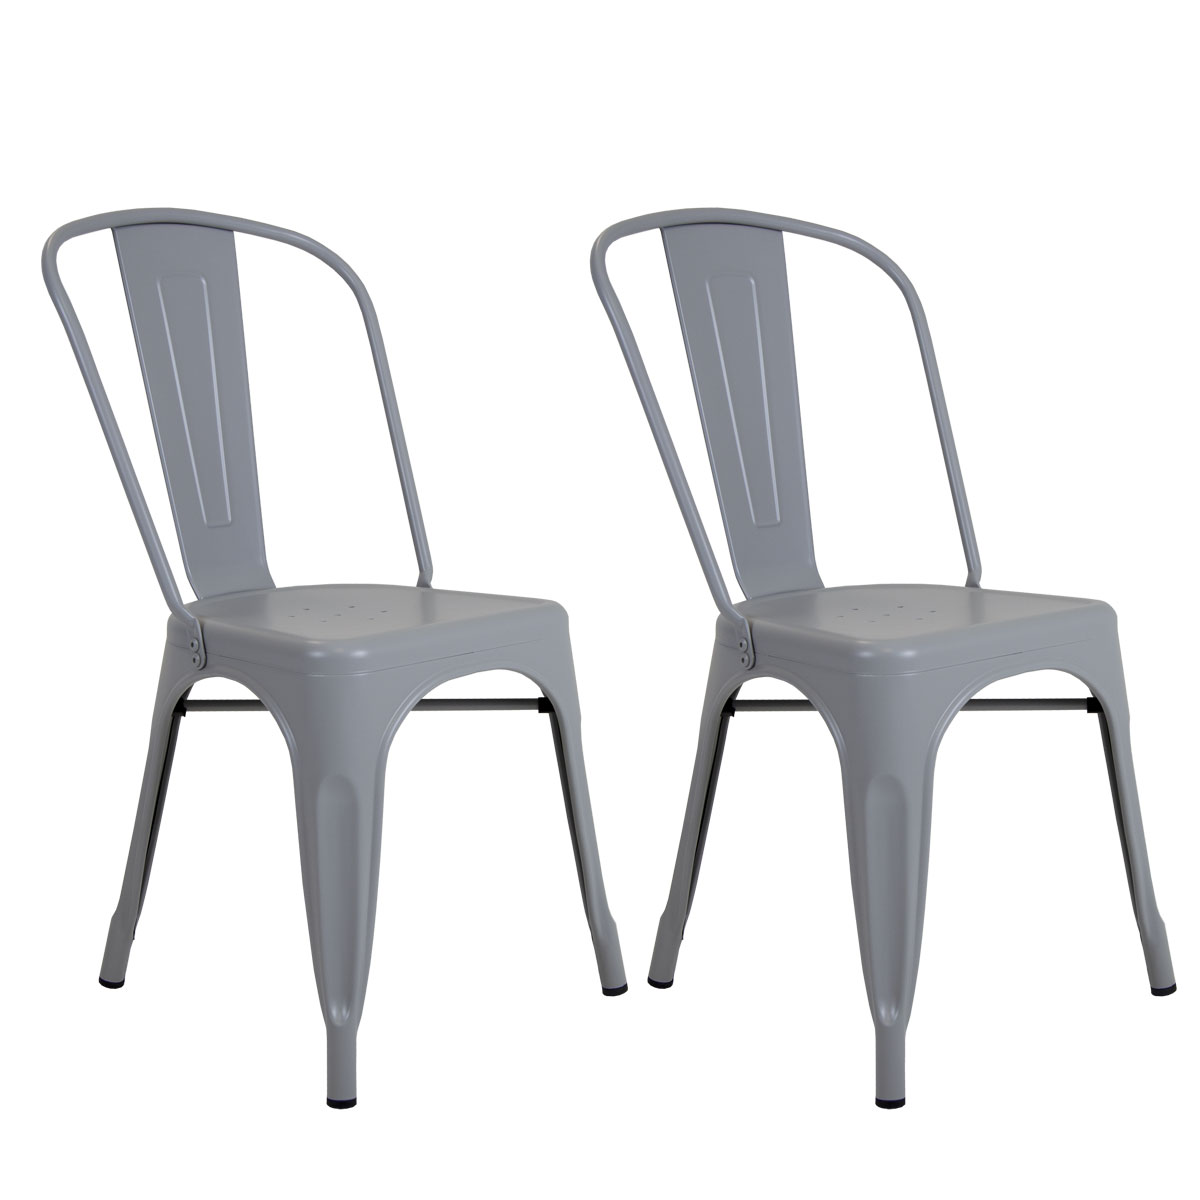 Charles Bentley Pair Of Industrial Dining Chairs Light Grey